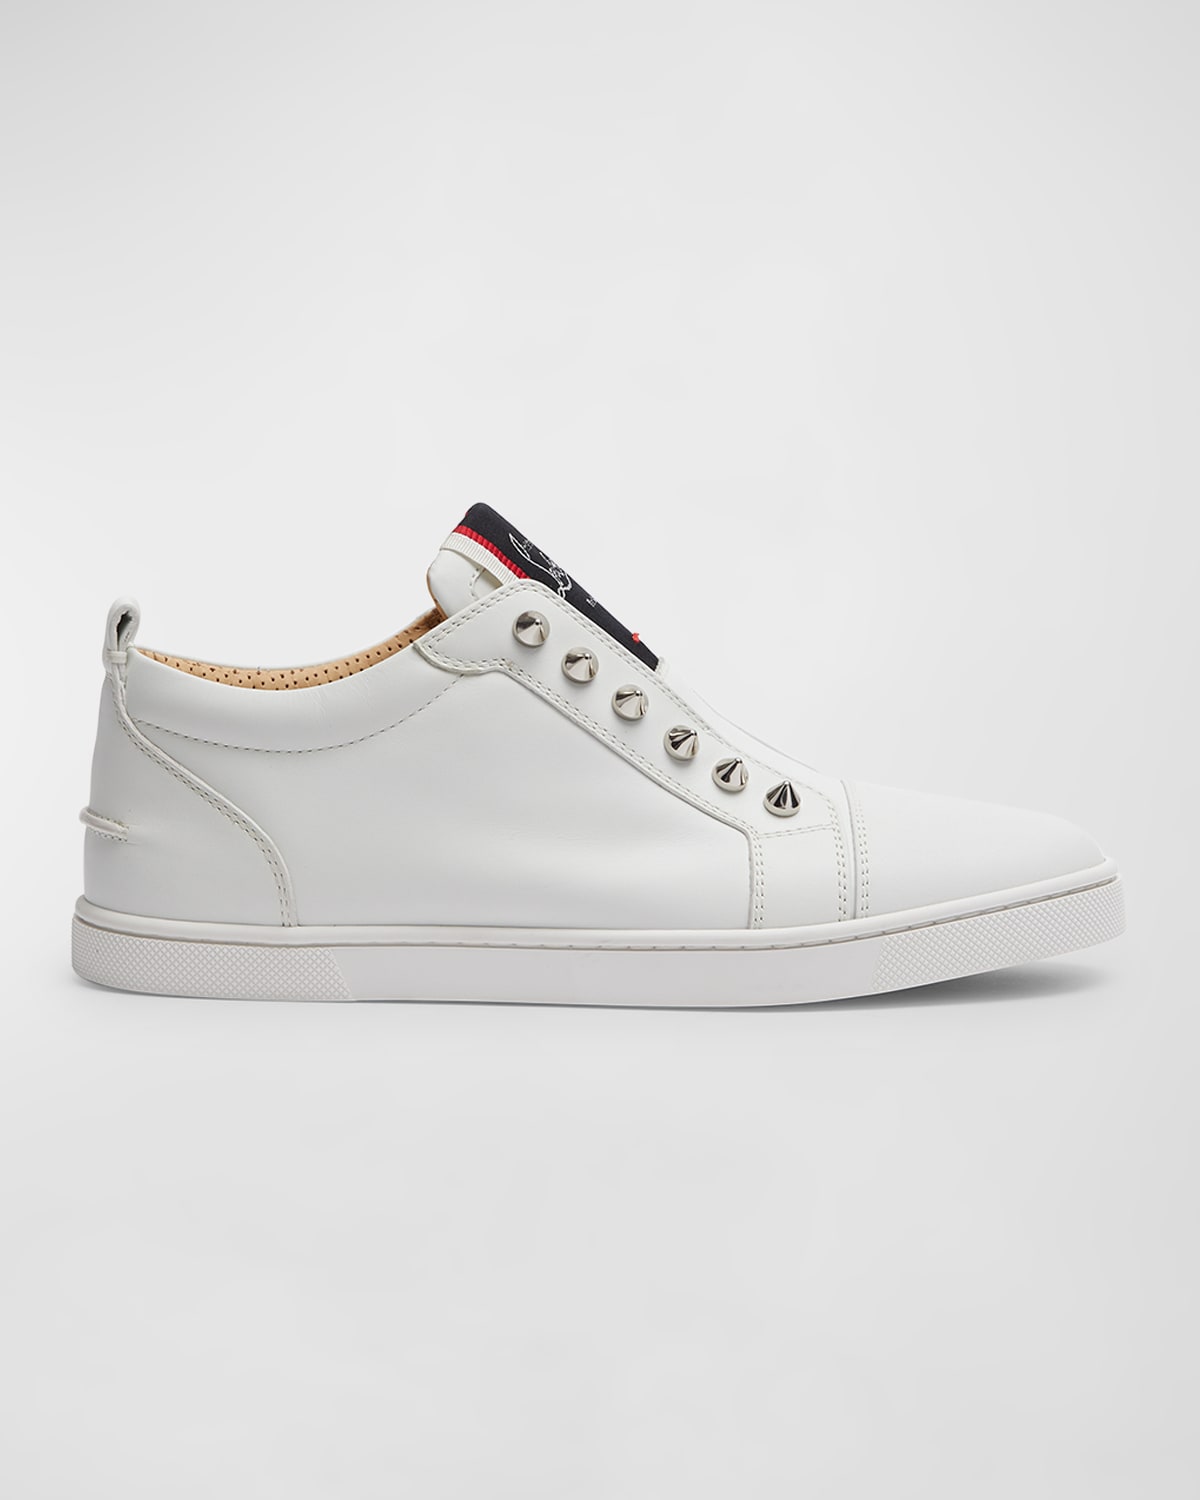 Shop Christian Louboutin Fique A Vontade Red Sole Leather Low-top Sneakers In White